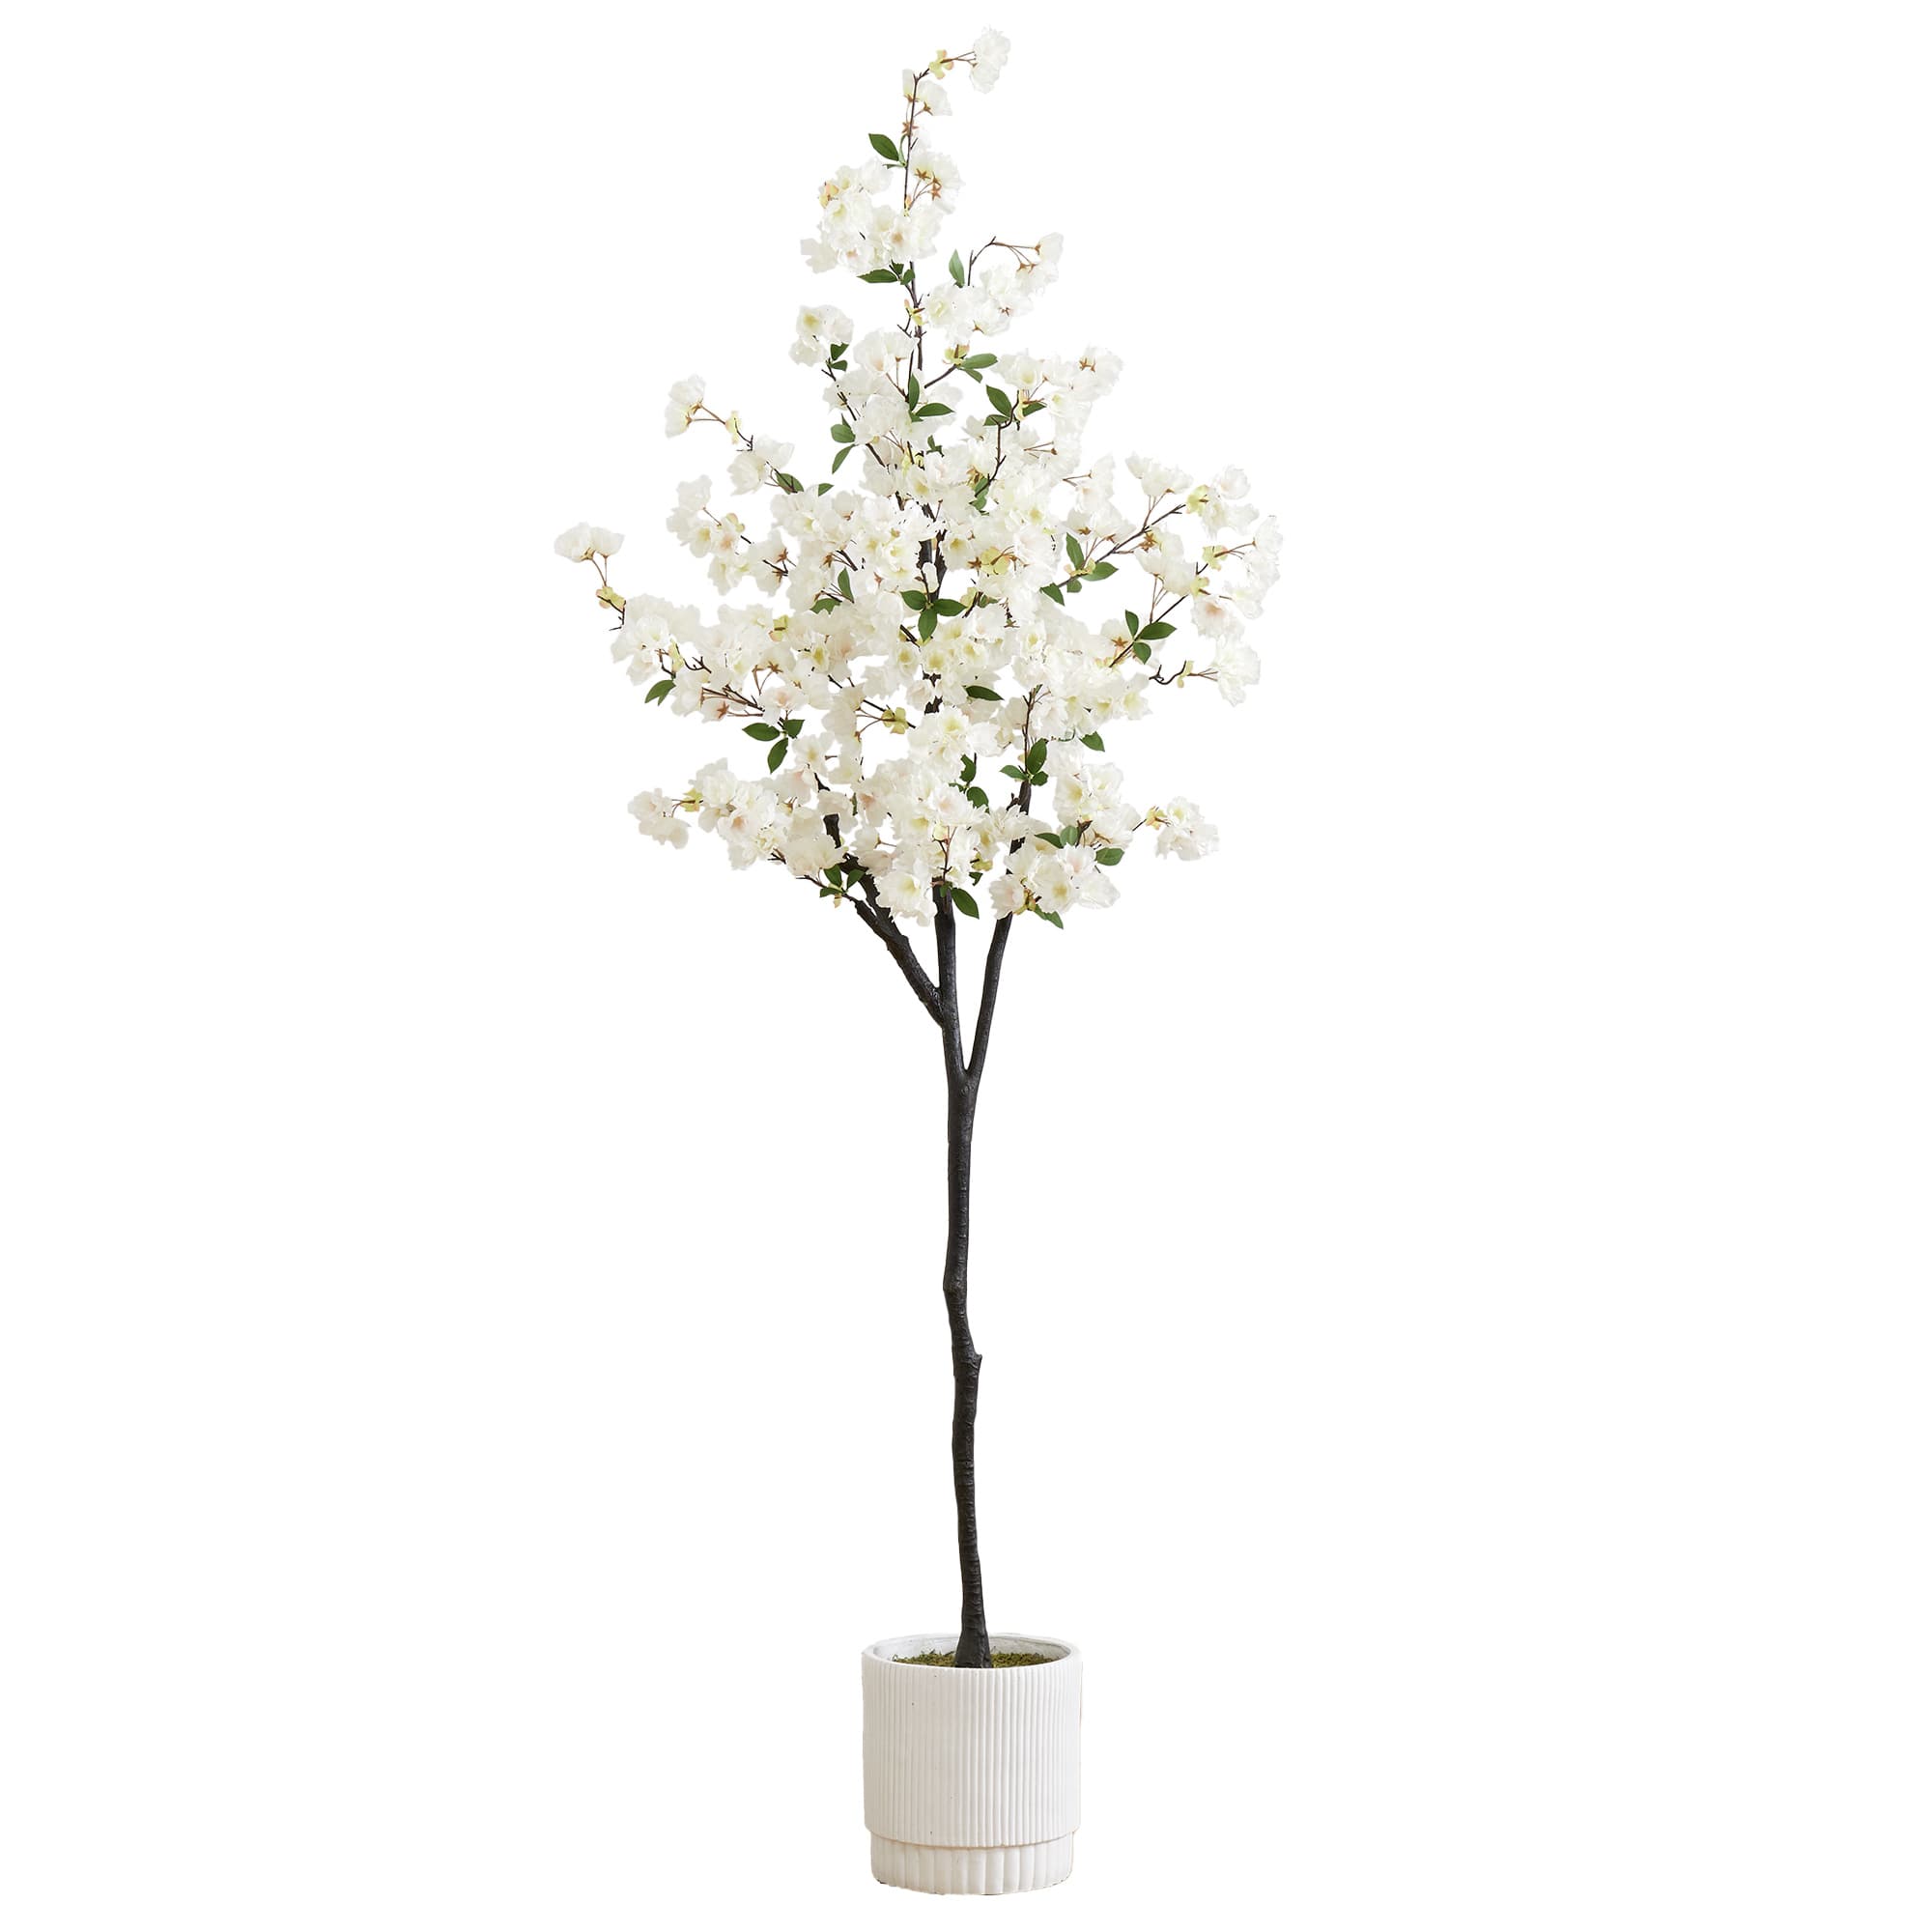 6ft. Artificial Cherry Blossom Tree with White Decorative Planter